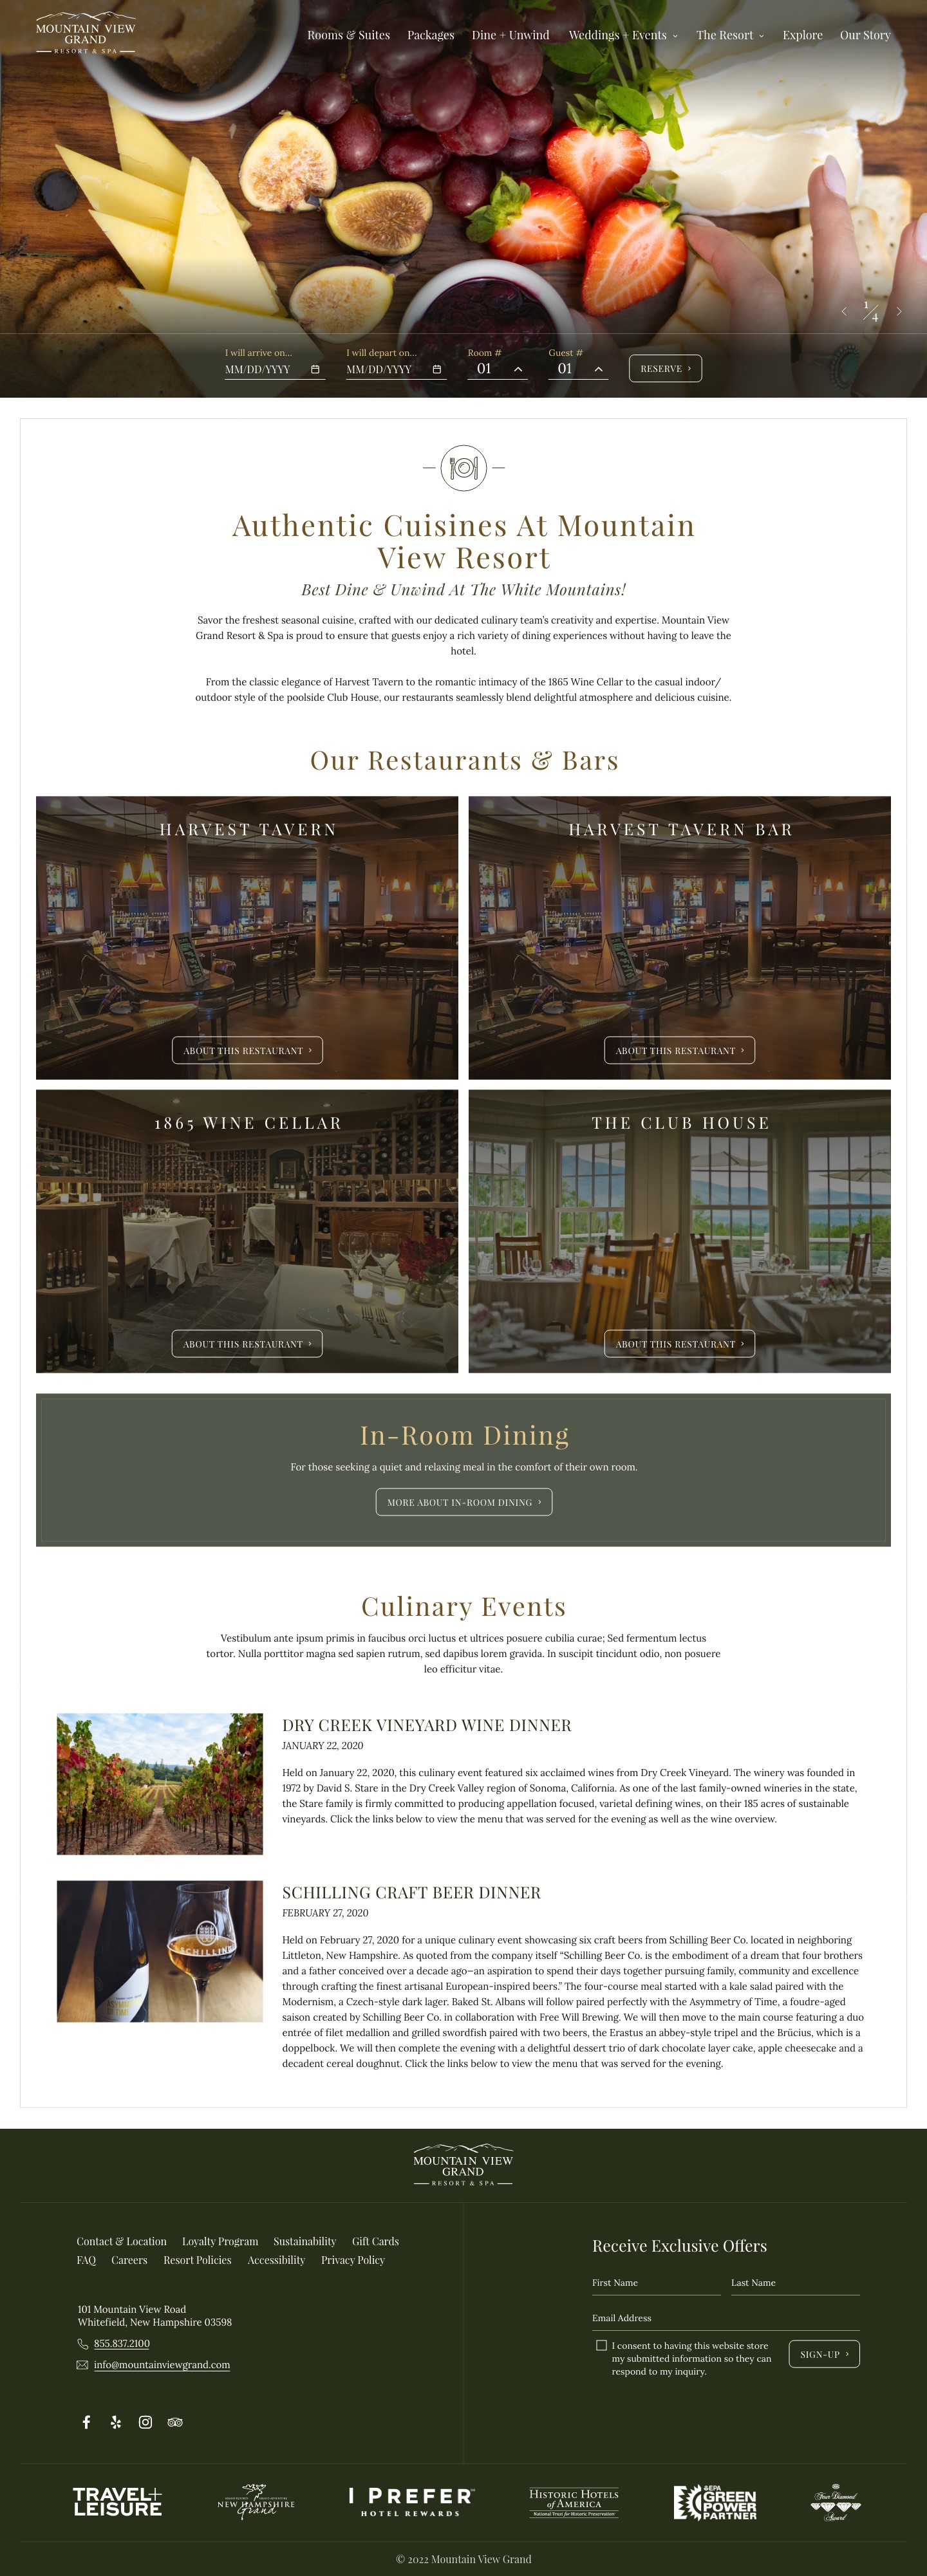 Mountain View Gran - Dining Page Design